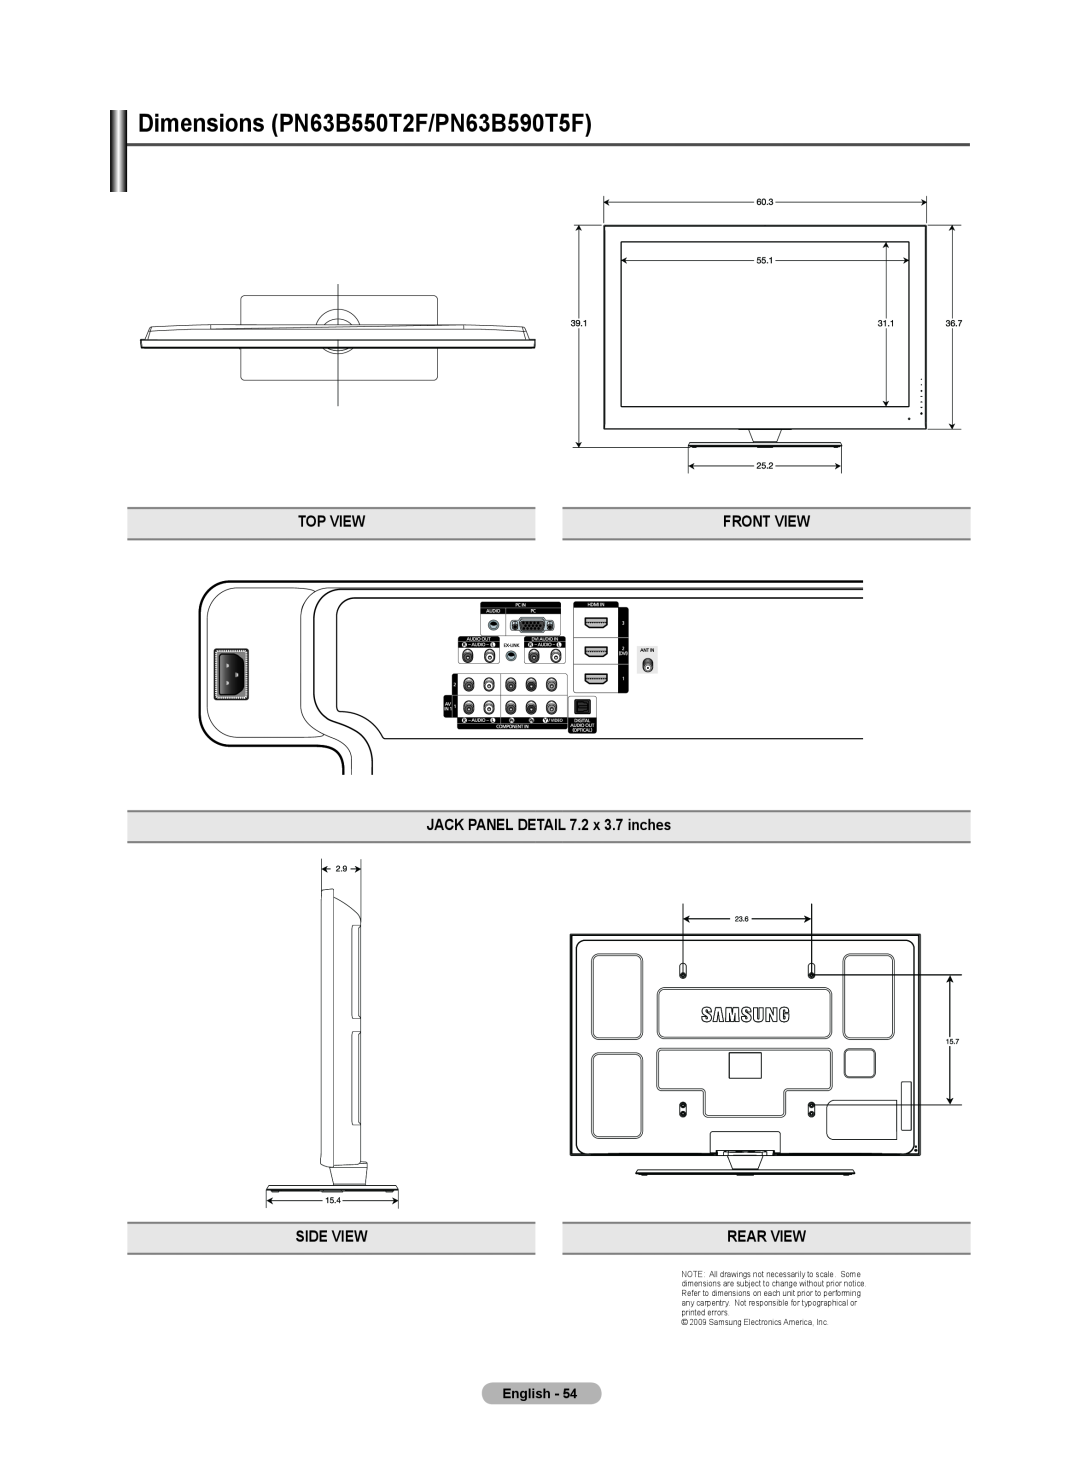 Samsung BN68-02221B-00 Top View, Front View, JACK PANEL DETAIL 7.2 x 3.7 inches, Side View, Rear View, English, 23.6 